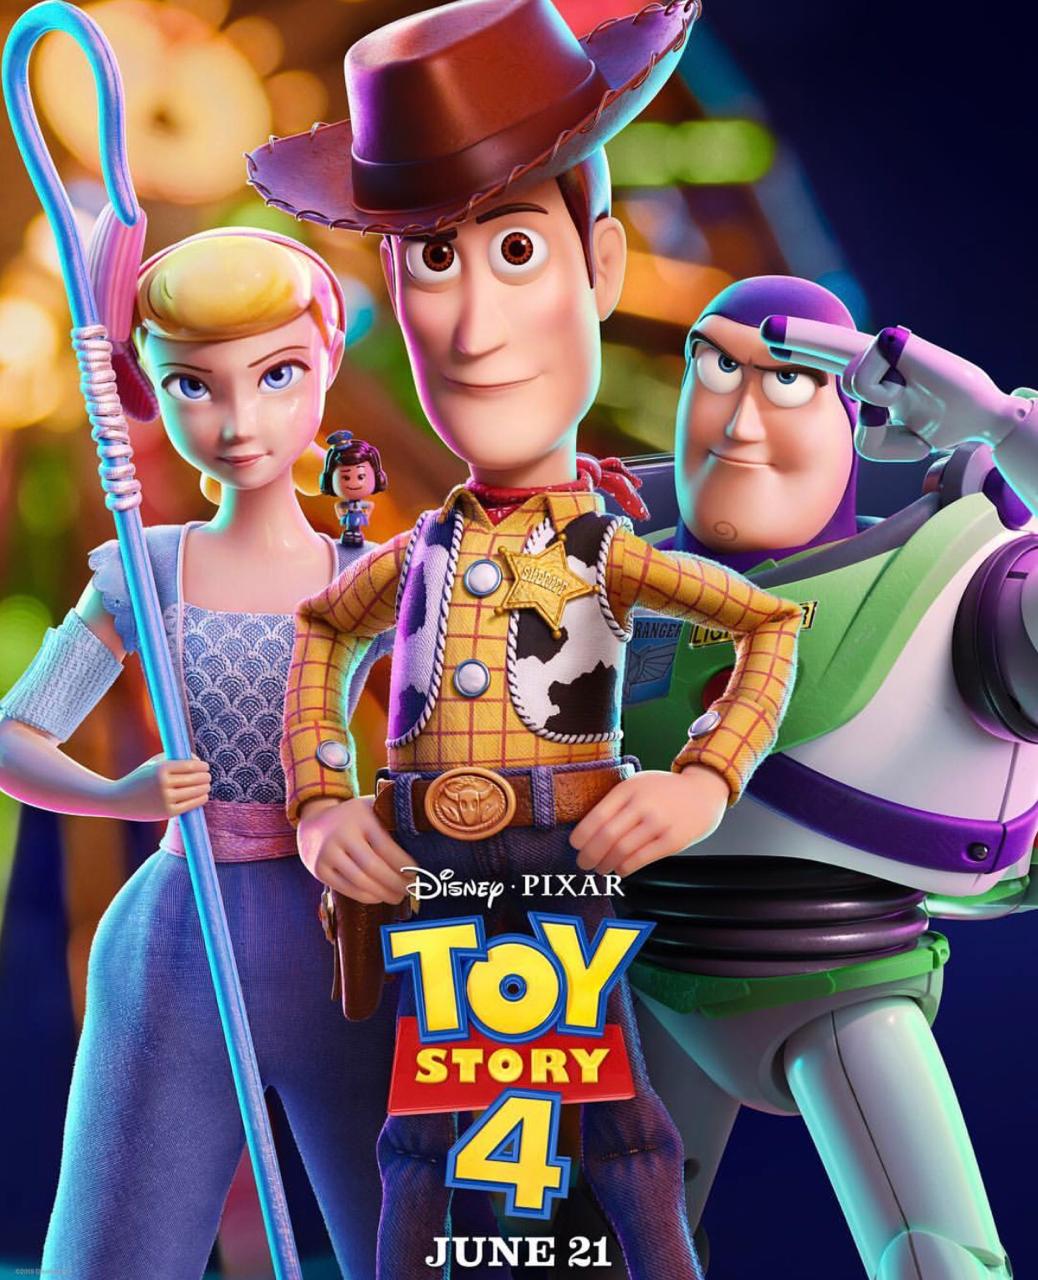 Toy Story 4 Review: Tom Hanks and Tim Allen's film 'sporks' out the right blend between nostalgia and novelty